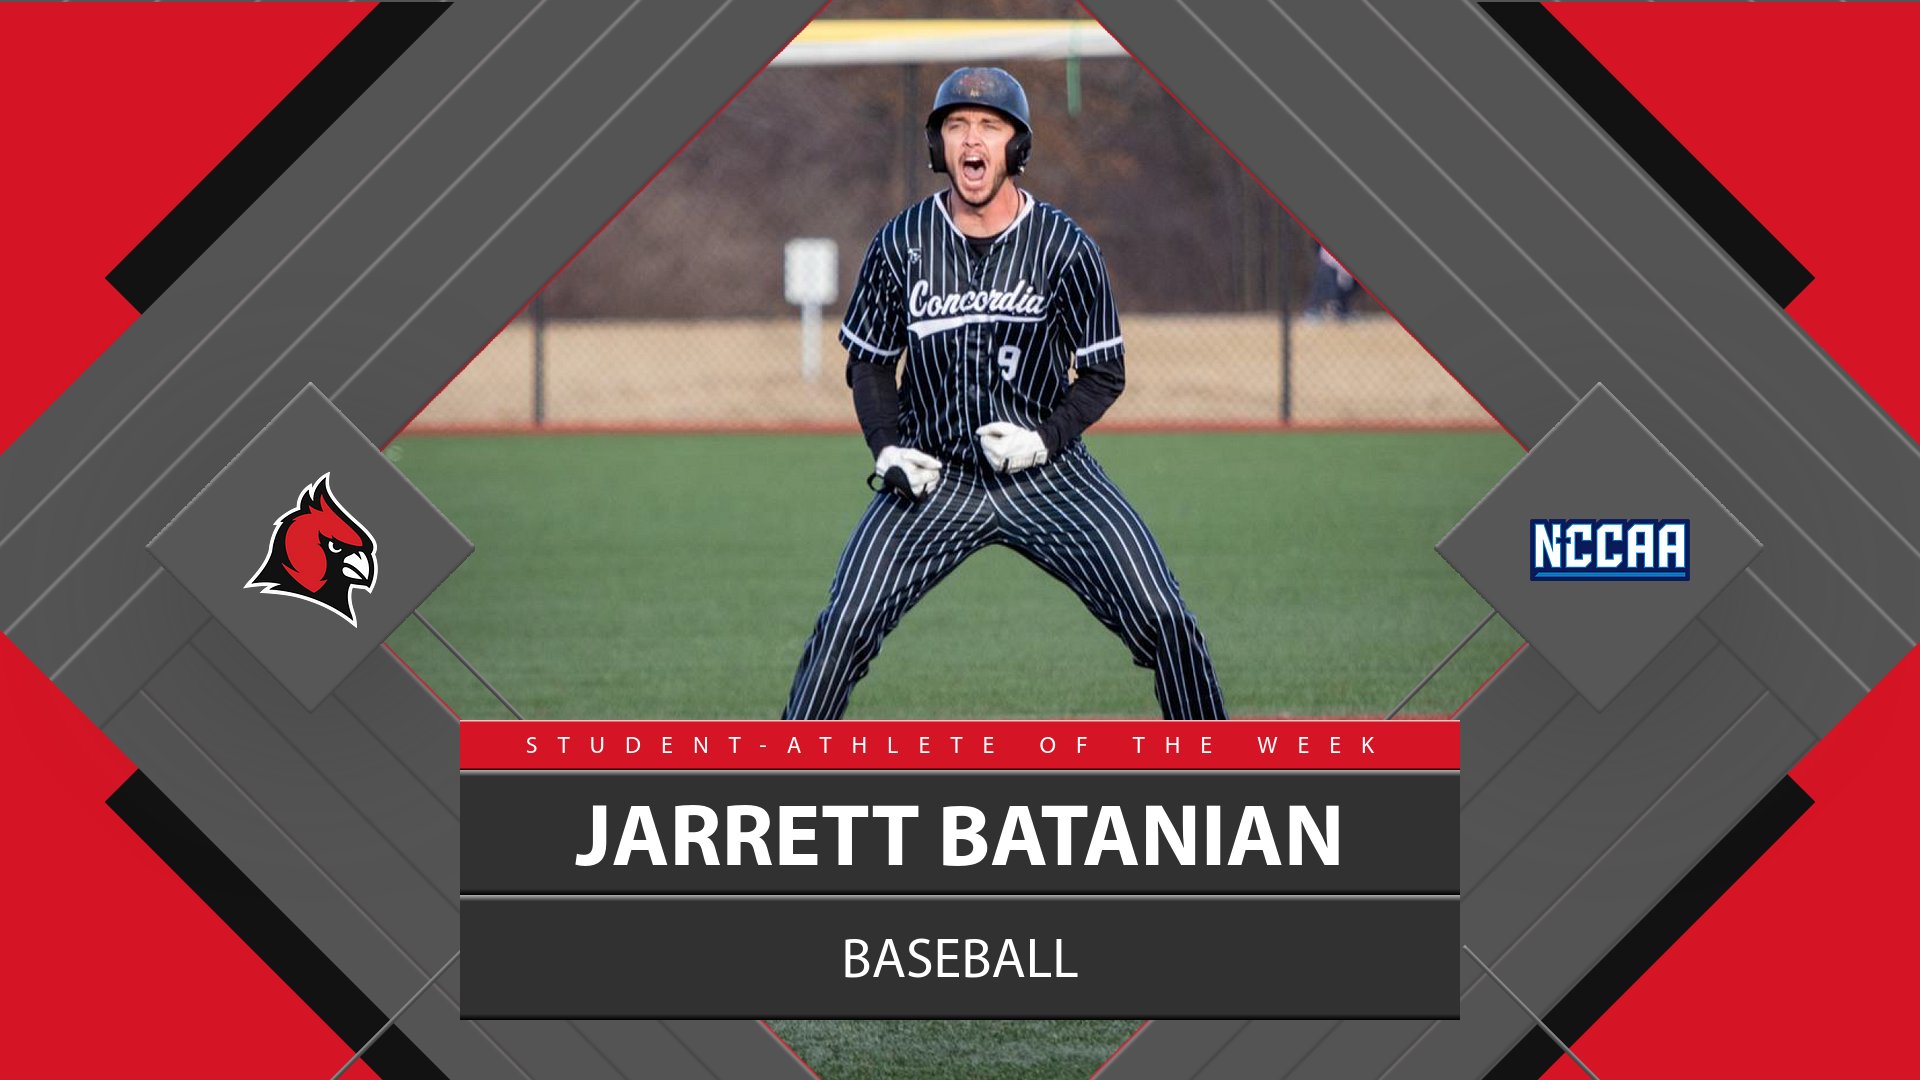 Batanian claims NCCAA Player of the Week honors